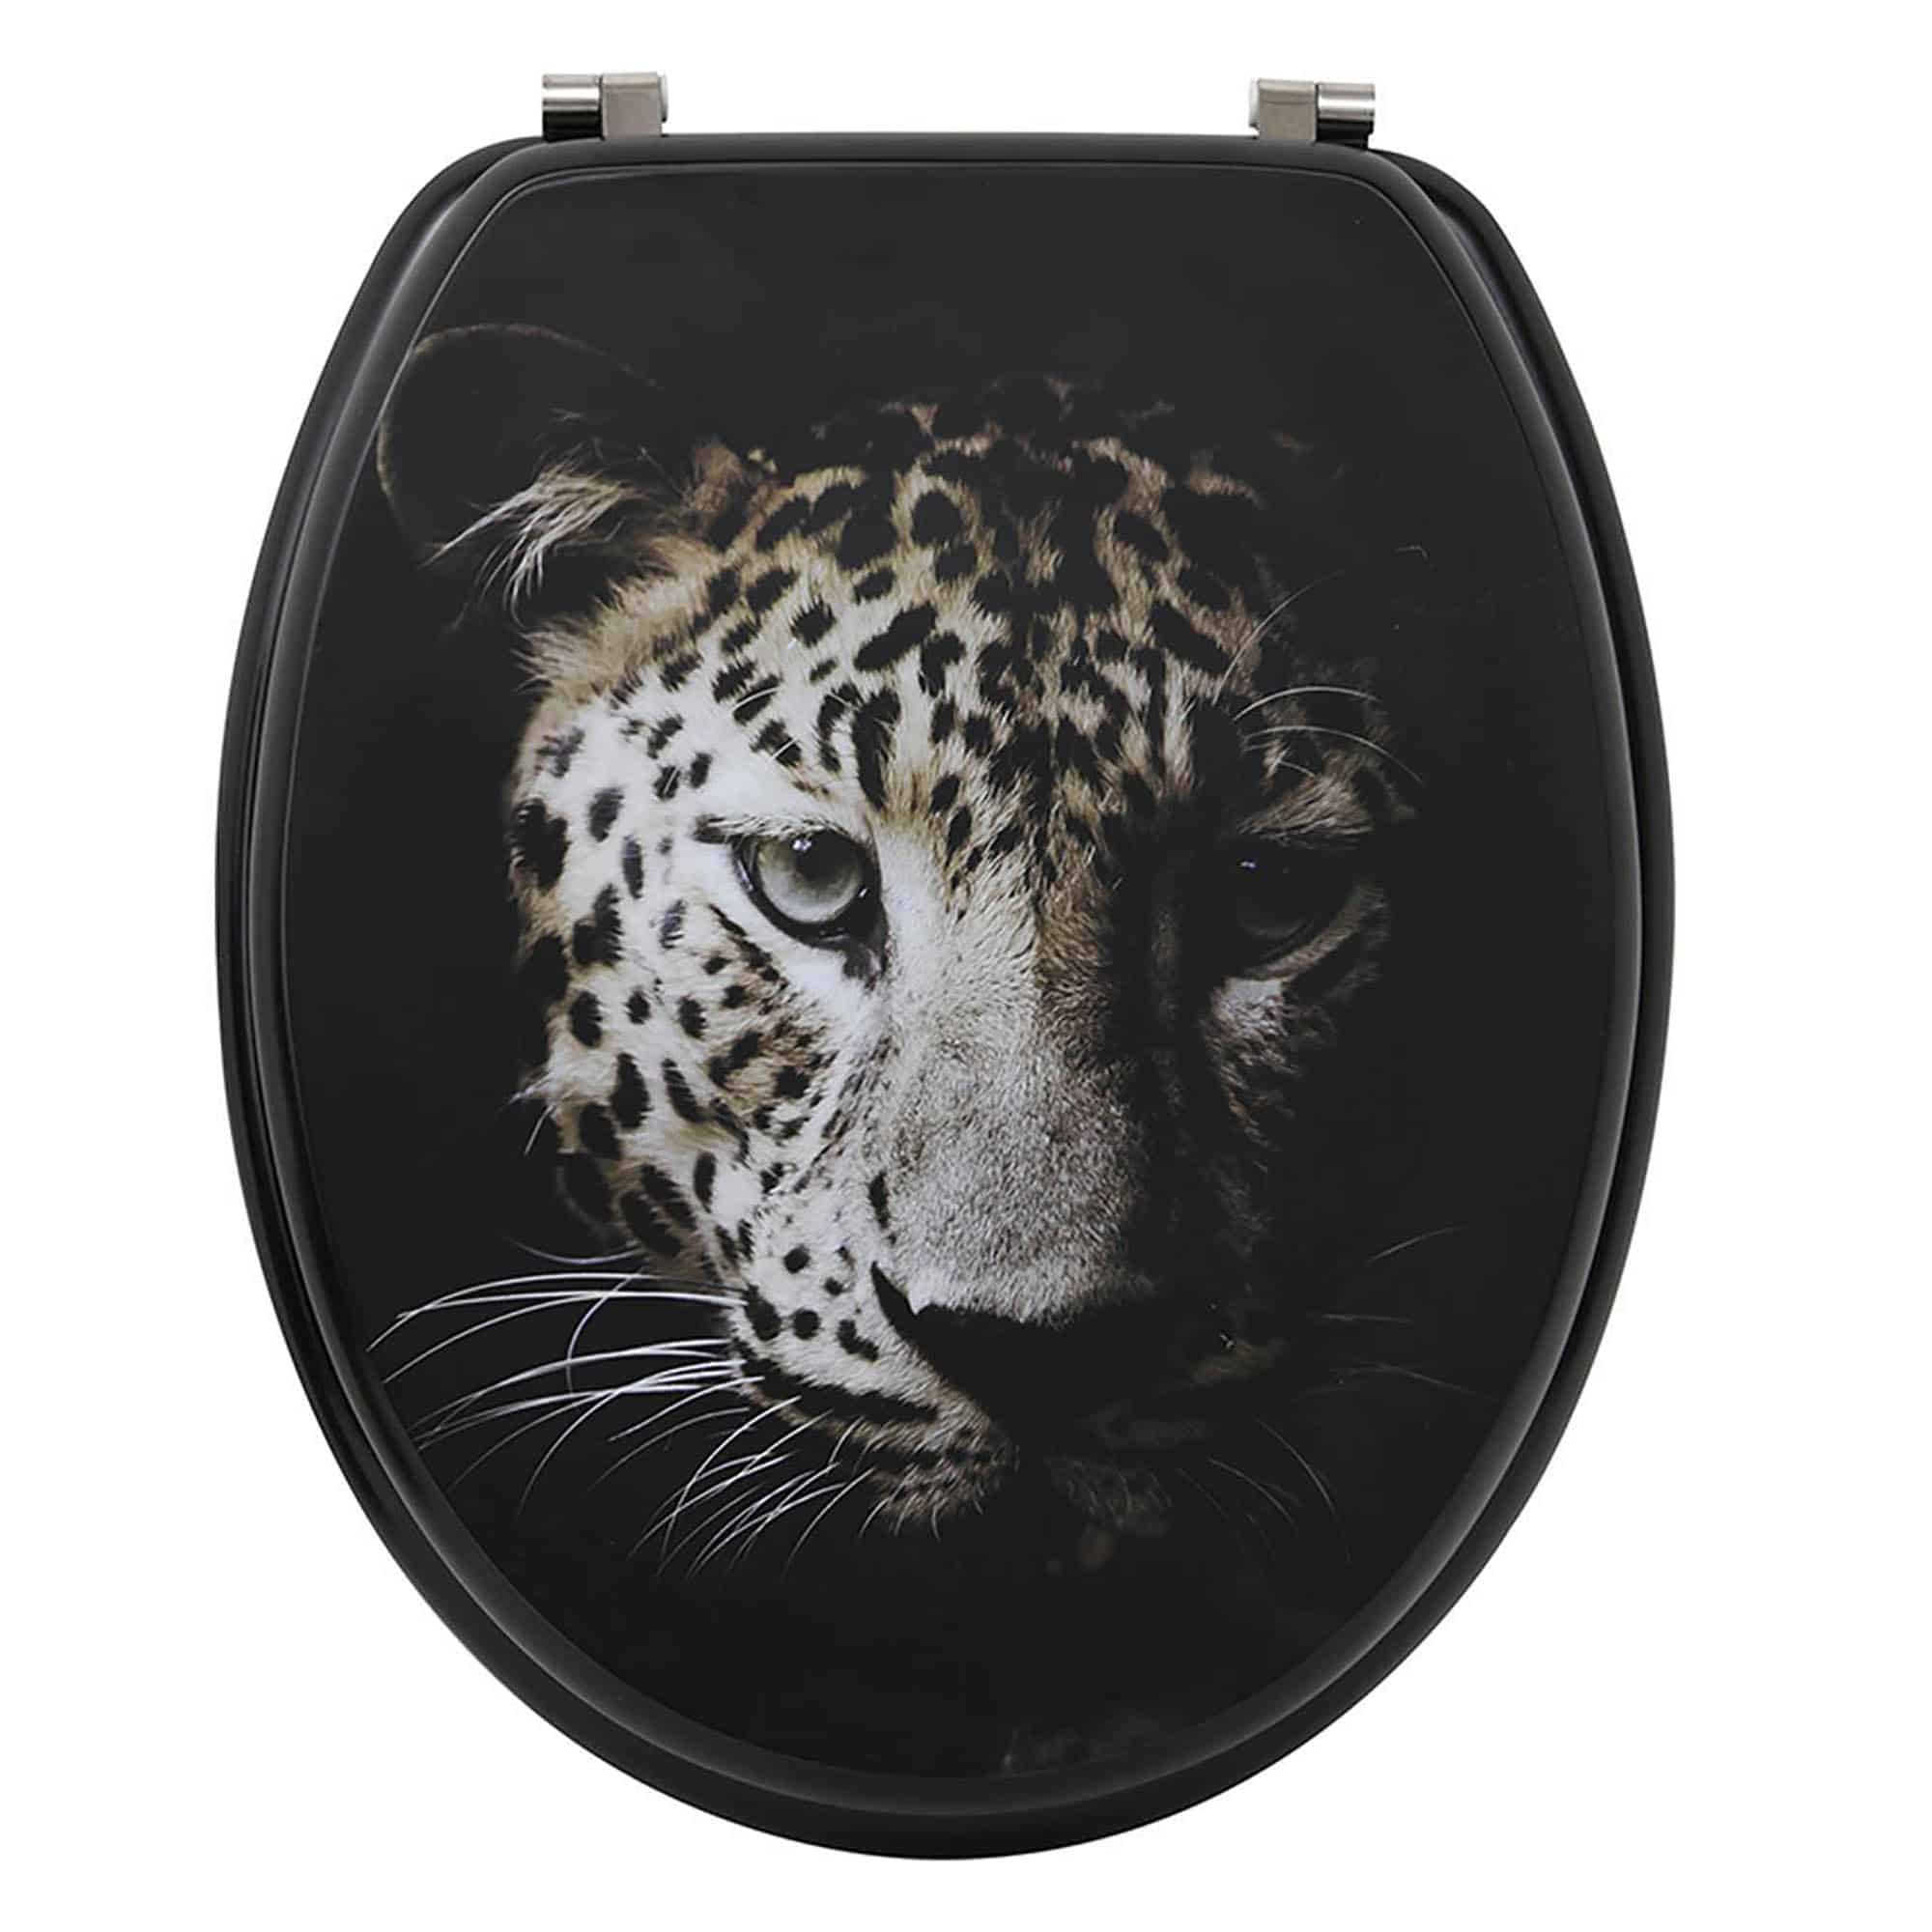 elongated toilet seat with panther design